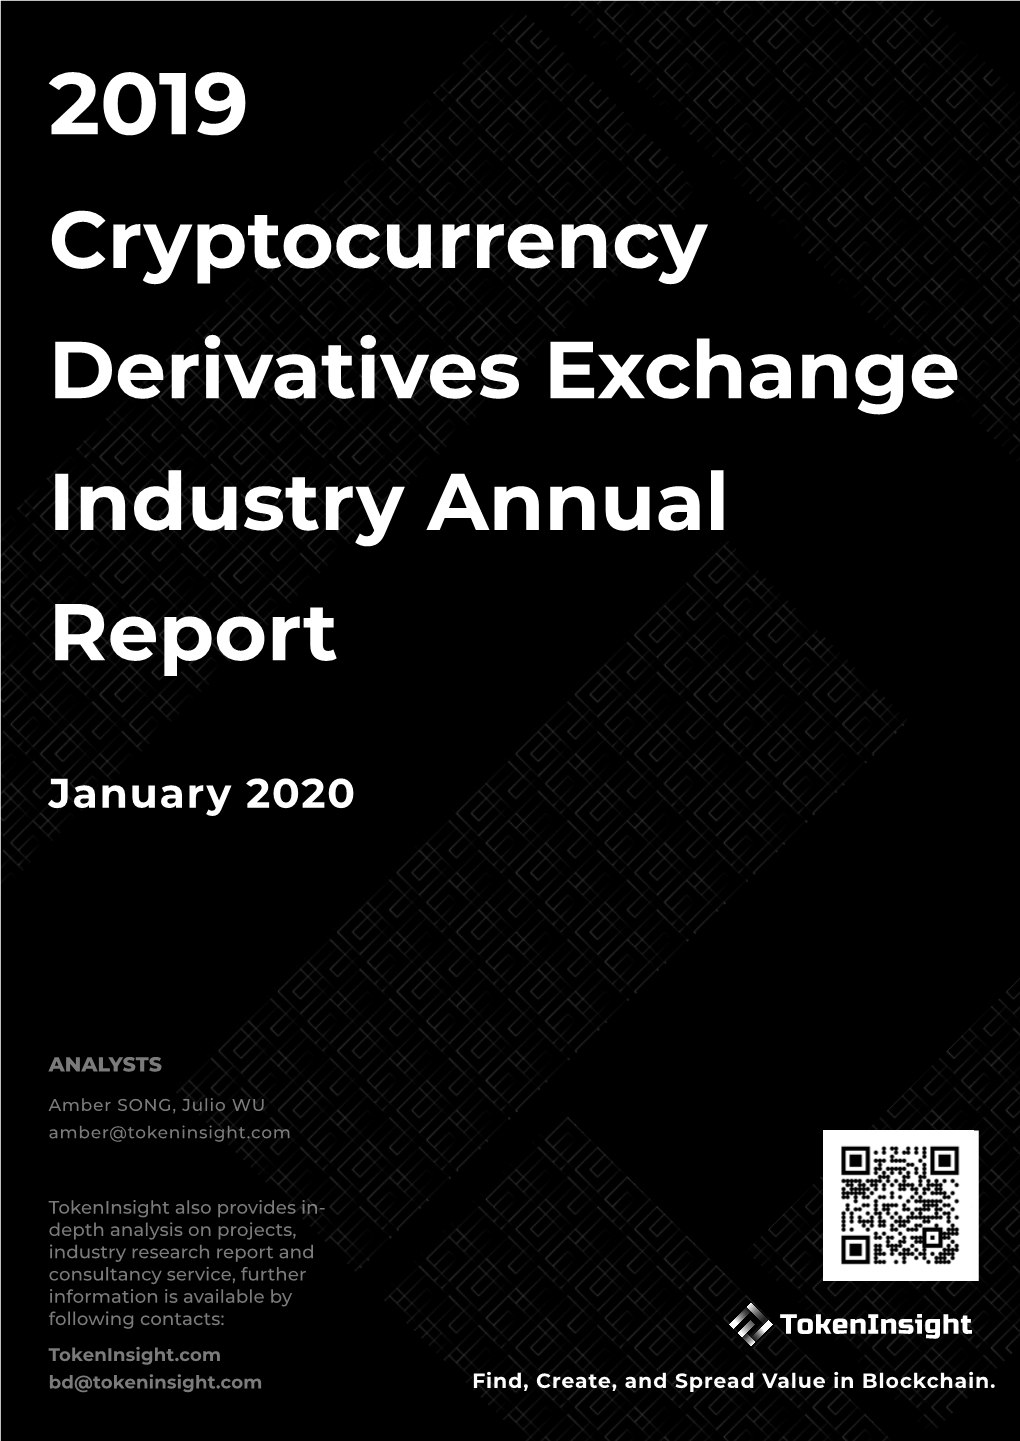 2019 Cryptocurrency Derivatives Exchange Industry Annual Report